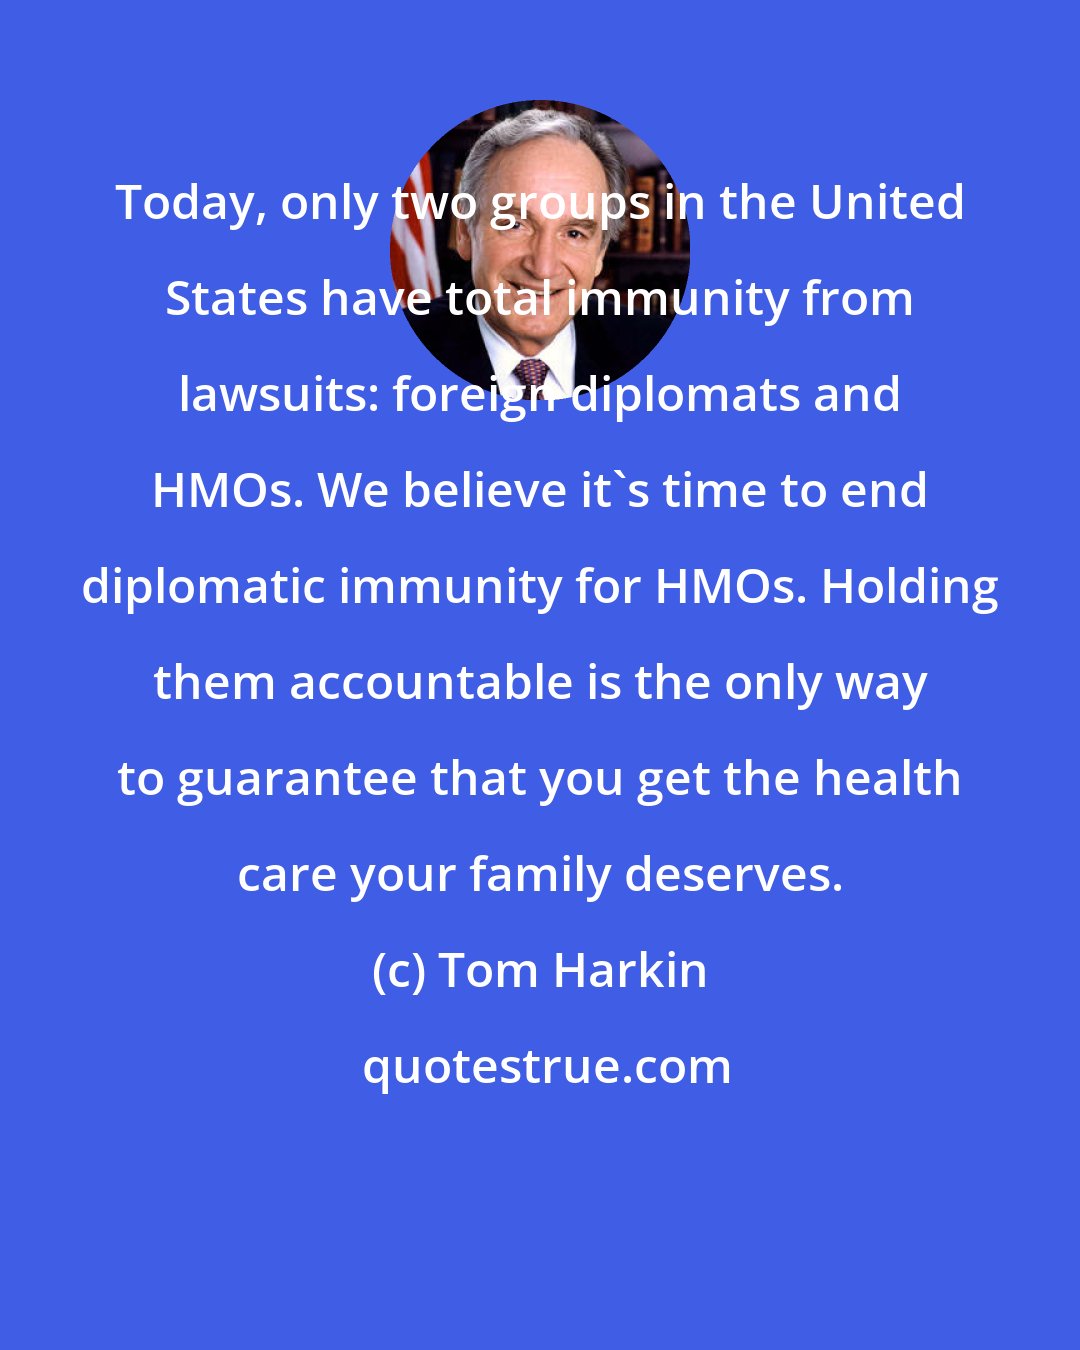 Tom Harkin: Today, only two groups in the United States have total immunity from lawsuits: foreign diplomats and HMOs. We believe it's time to end diplomatic immunity for HMOs. Holding them accountable is the only way to guarantee that you get the health care your family deserves.